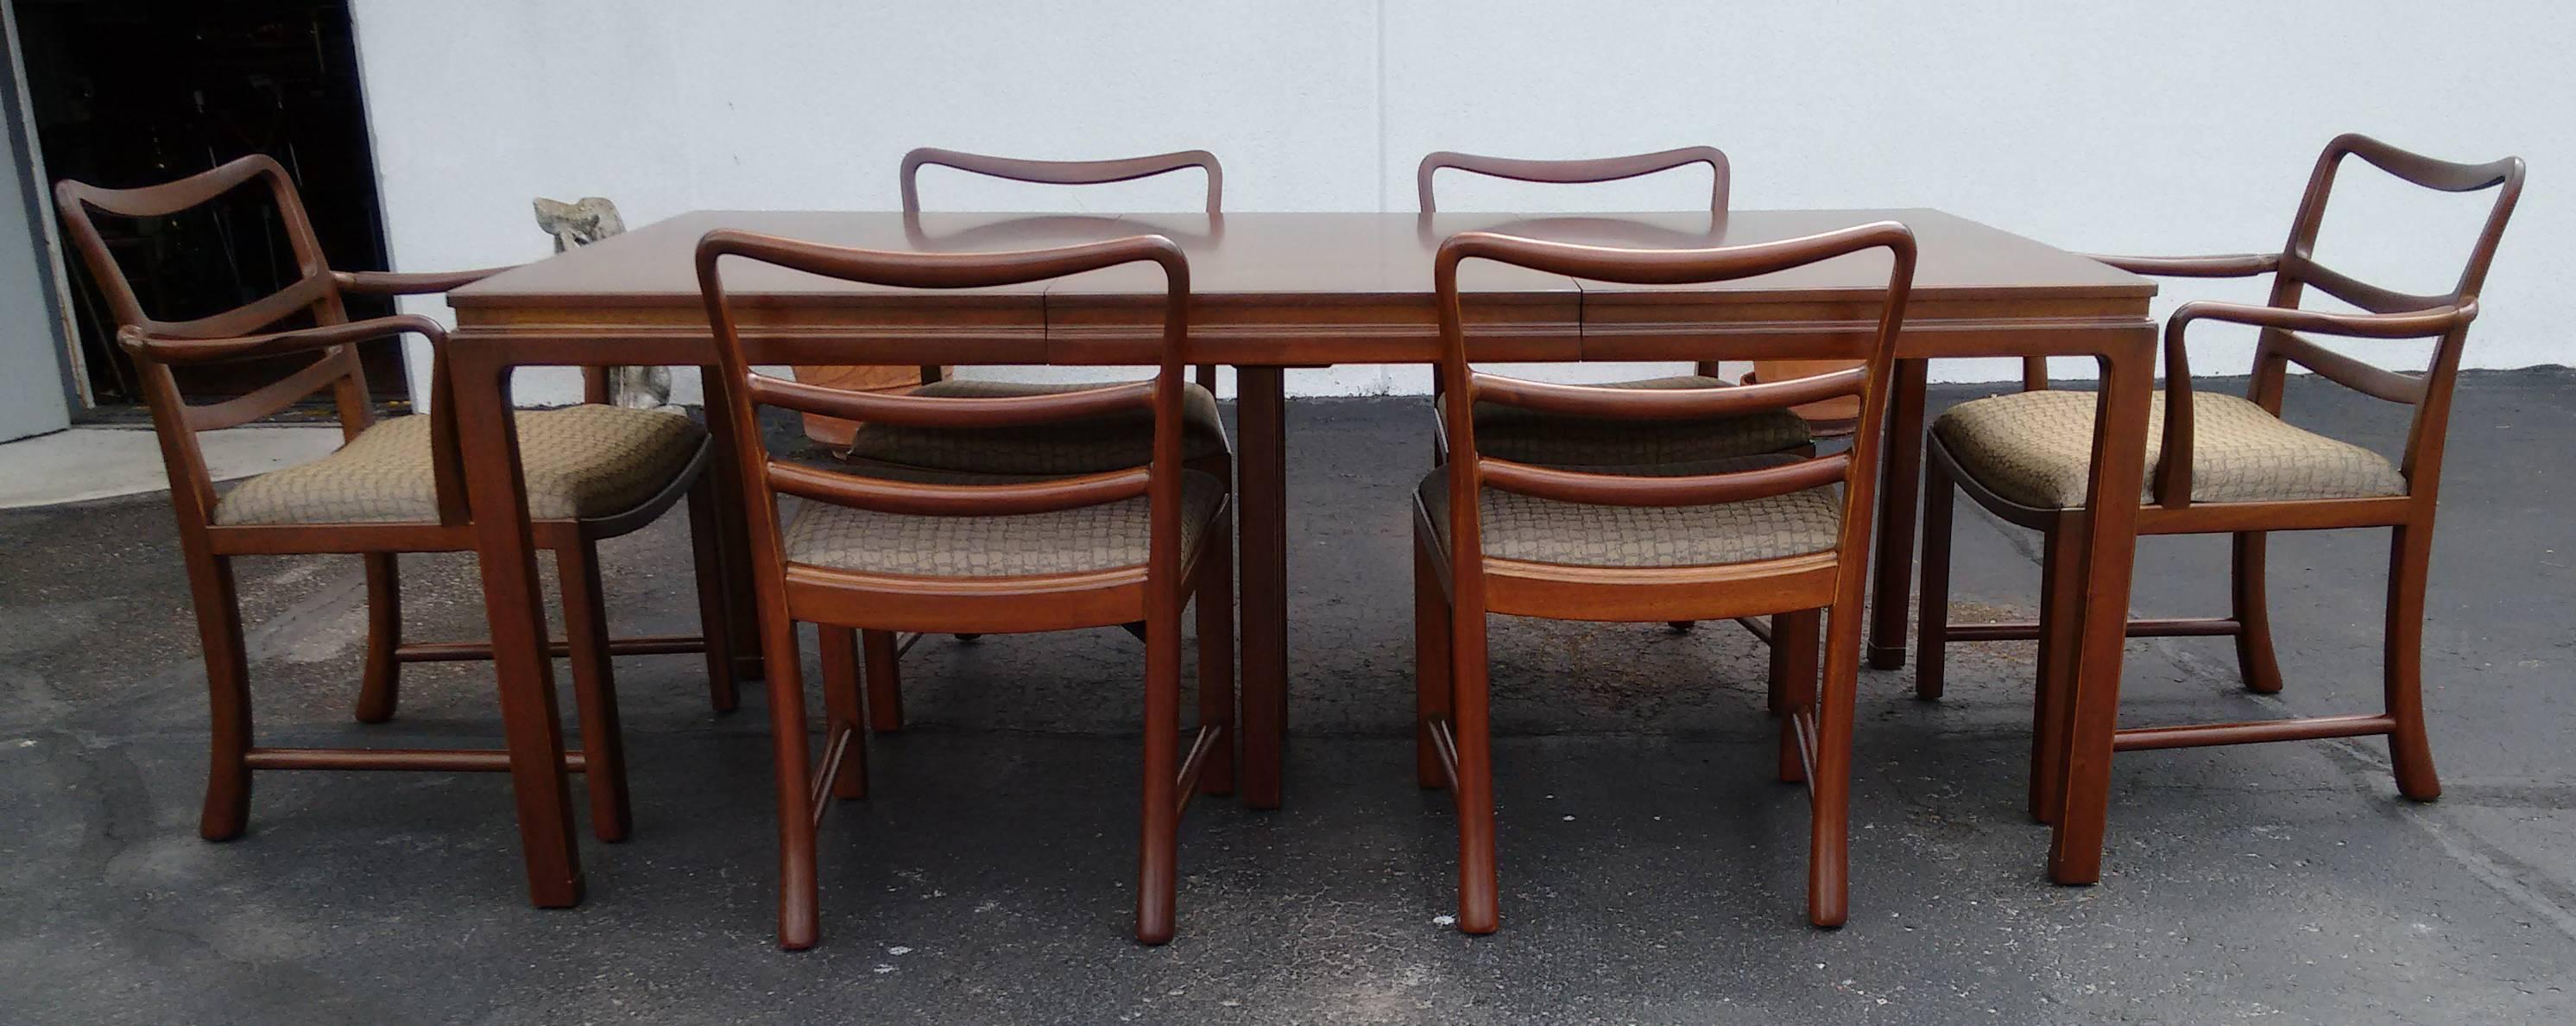 Mid-20th Century Mahogany Signed Dunbar Dining Set with Table Six Chairs and One Leaf